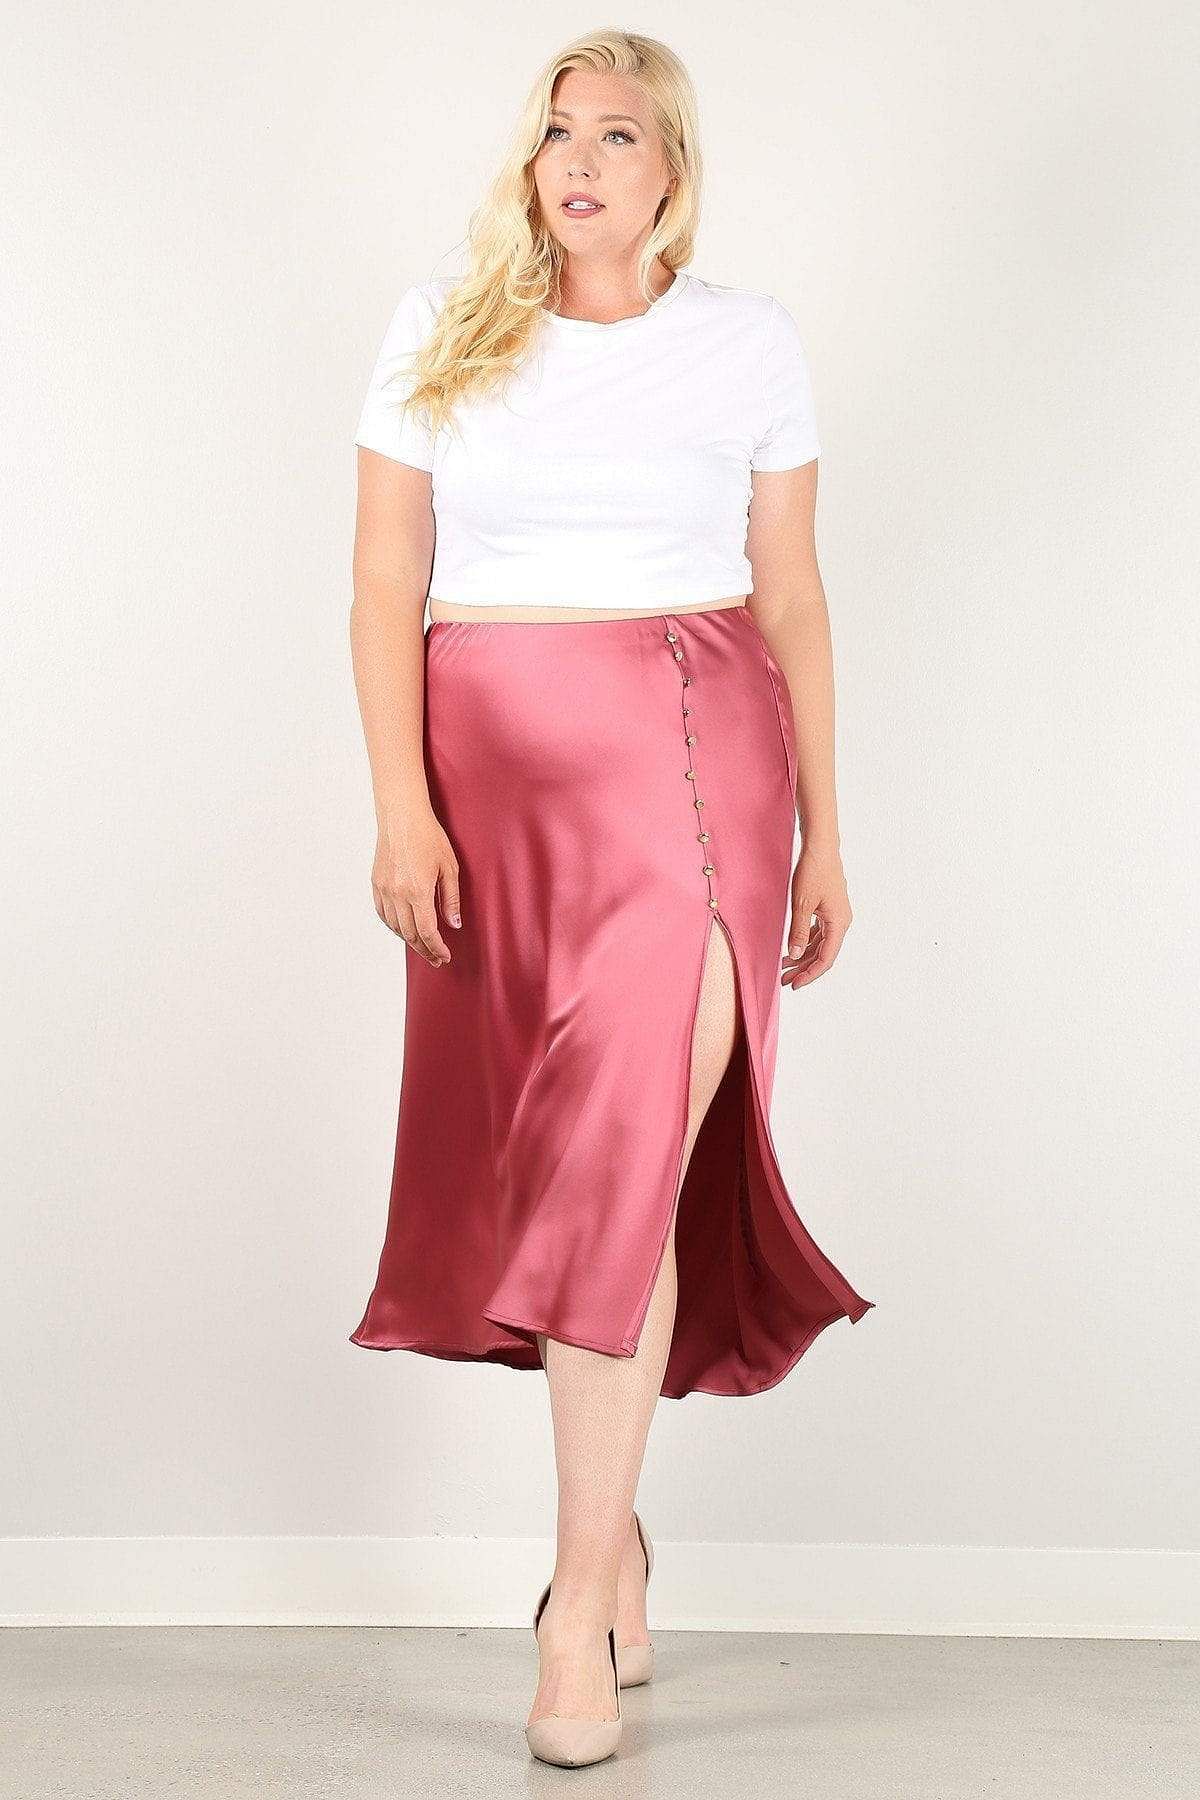 Rose Plus Size Midi Skirt With Side Slit - Shopping Therapy 2XL skirt